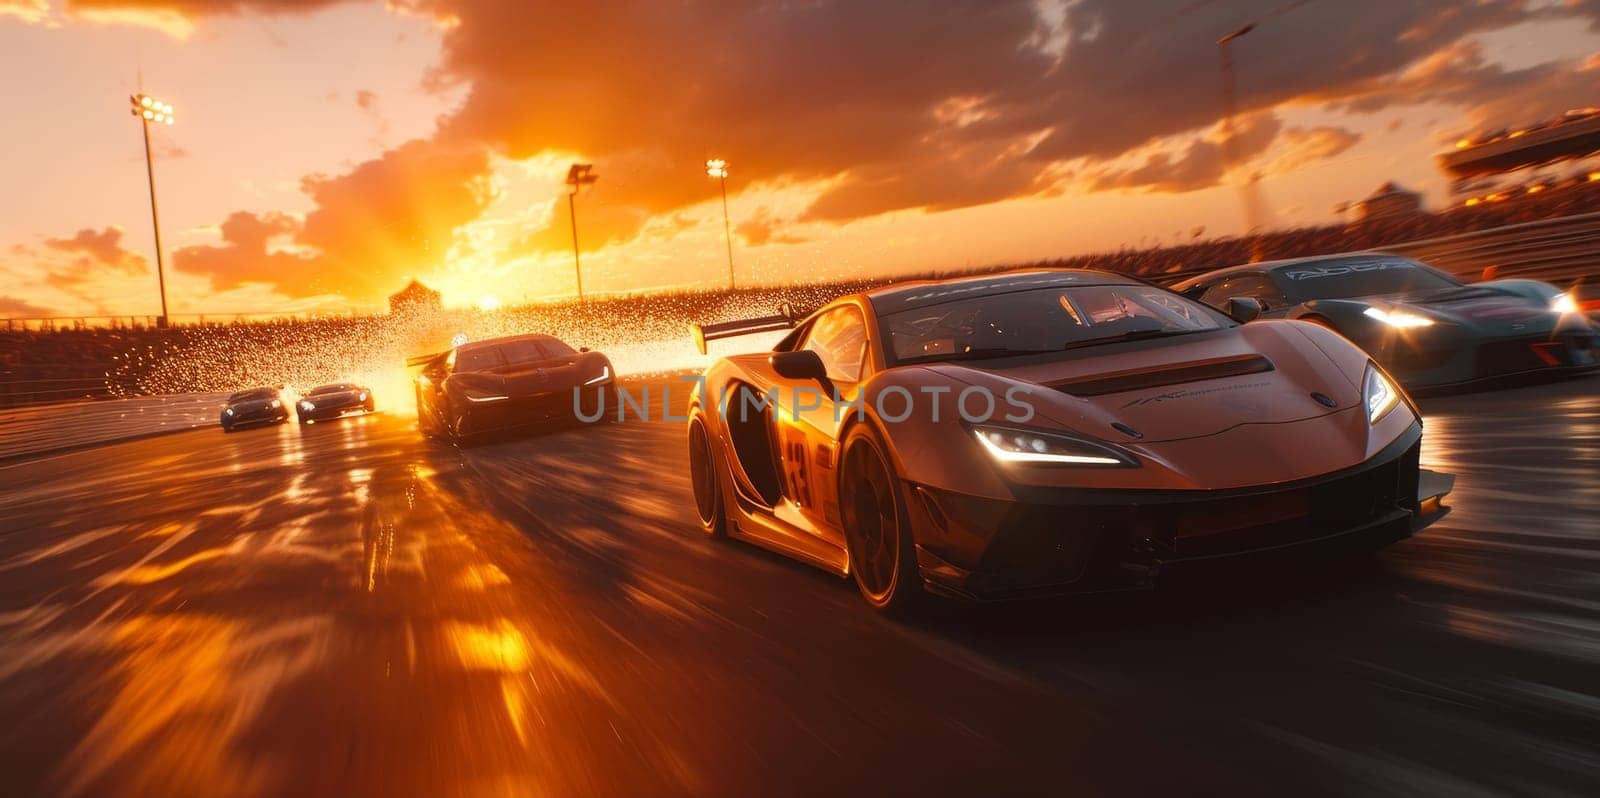 A spectacular scene on the speedway as racing cars compete against the backdrop of a stunning sunset, their motion captured in a vivid display of speed and agility. by sfinks